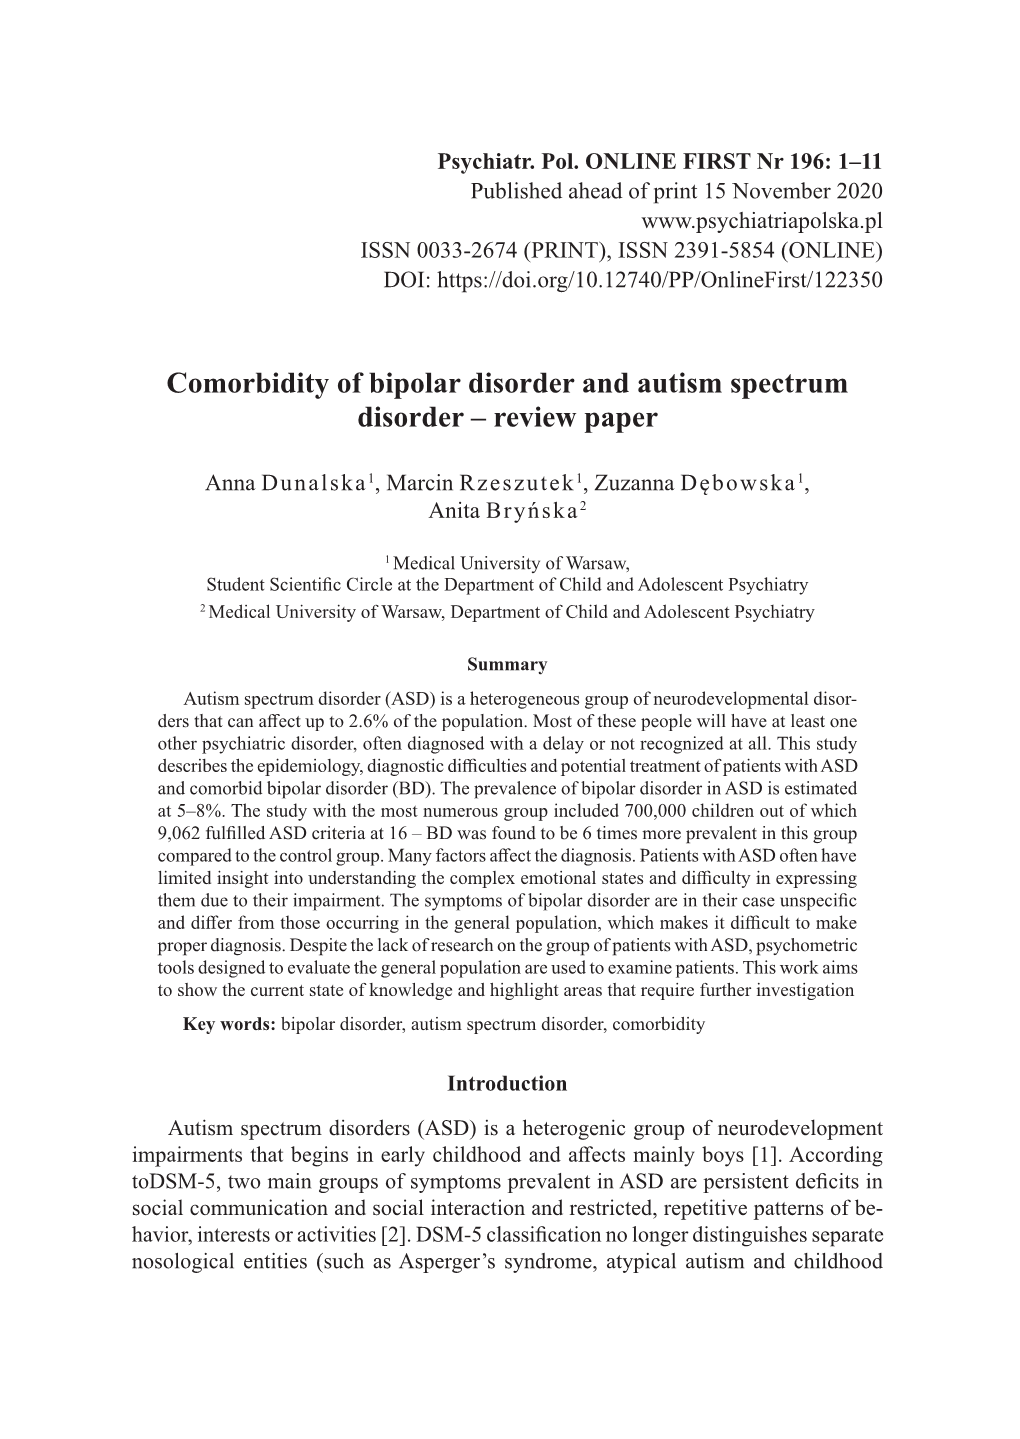 Comorbidity of Bipolar Disorder and Autism Spectrum Disorder – Review Paper